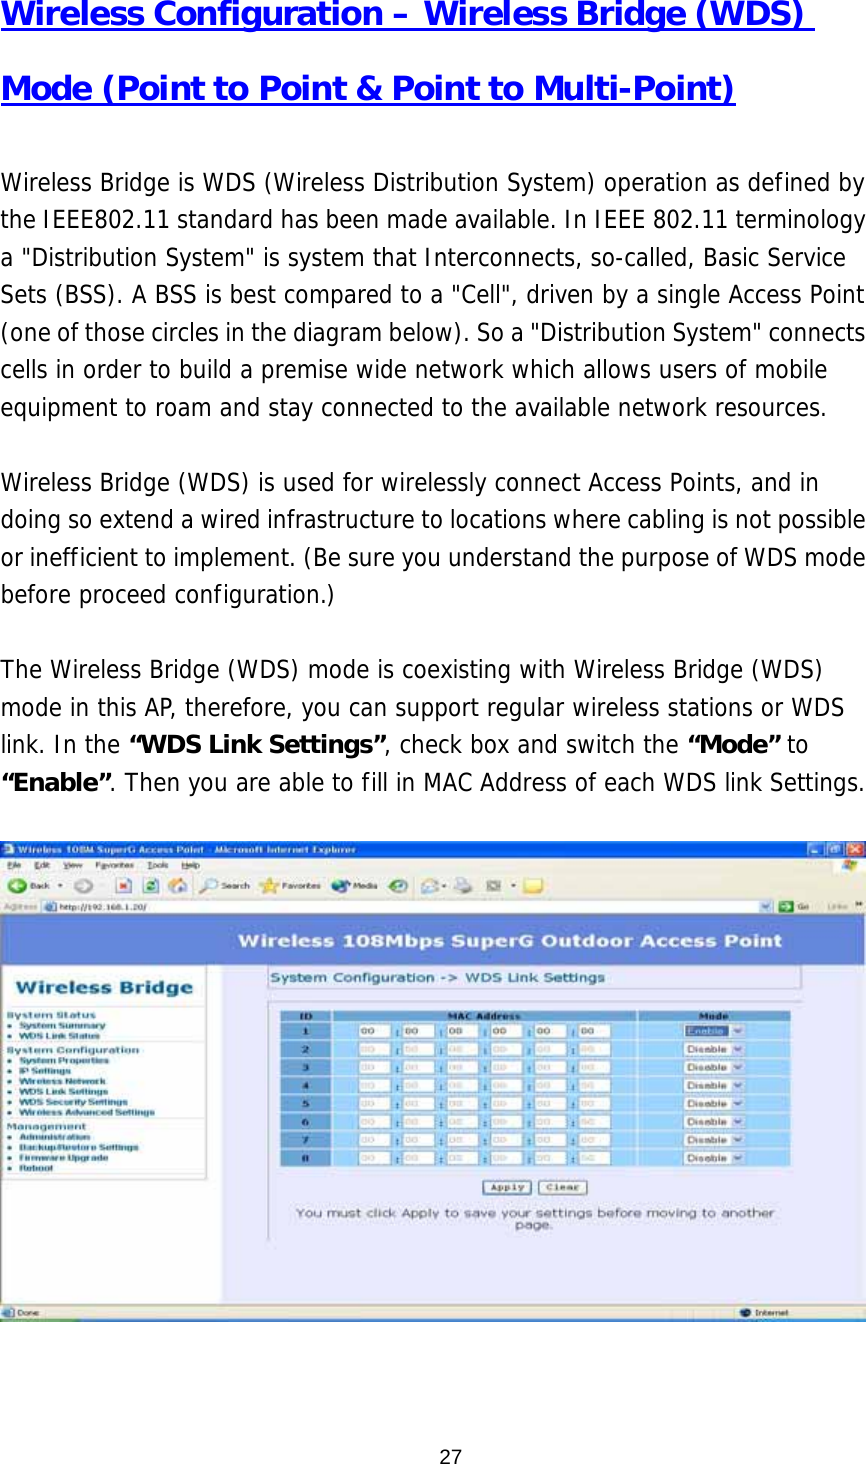  27Wireless Configuration – Wireless Bridge (WDS) Mode (Point to Point &amp; Point to Multi-Point)  Wireless Bridge is WDS (Wireless Distribution System) operation as defined by the IEEE802.11 standard has been made available. In IEEE 802.11 terminology a &quot;Distribution System&quot; is system that Interconnects, so-called, Basic Service Sets (BSS). A BSS is best compared to a &quot;Cell&quot;, driven by a single Access Point (one of those circles in the diagram below). So a &quot;Distribution System&quot; connects cells in order to build a premise wide network which allows users of mobile equipment to roam and stay connected to the available network resources.   Wireless Bridge (WDS) is used for wirelessly connect Access Points, and in doing so extend a wired infrastructure to locations where cabling is not possible or inefficient to implement. (Be sure you understand the purpose of WDS mode before proceed configuration.)  The Wireless Bridge (WDS) mode is coexisting with Wireless Bridge (WDS) mode in this AP, therefore, you can support regular wireless stations or WDS link. In the “WDS Link Settings”, check box and switch the “Mode” to “Enable”. Then you are able to fill in MAC Address of each WDS link Settings.       